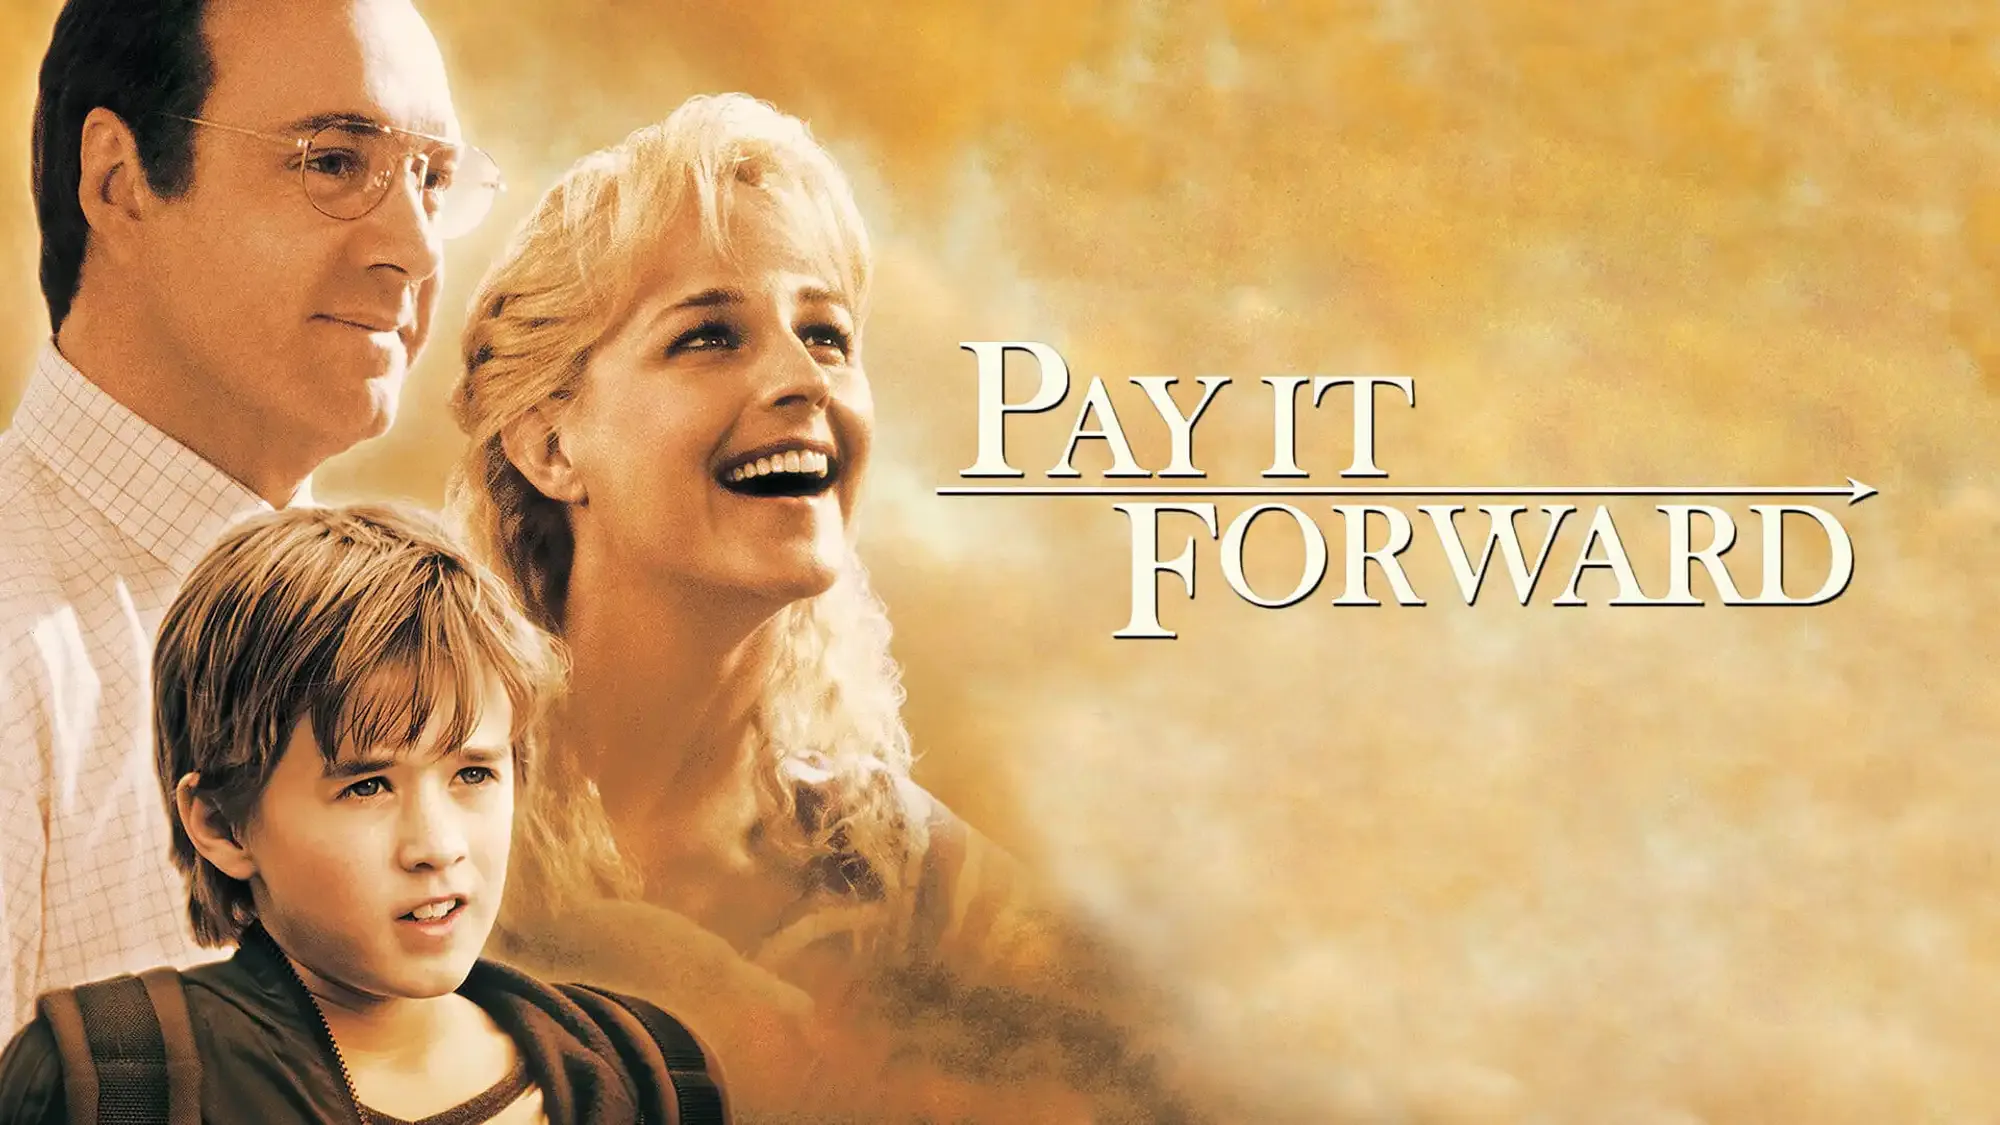 Pay It Forward movie review